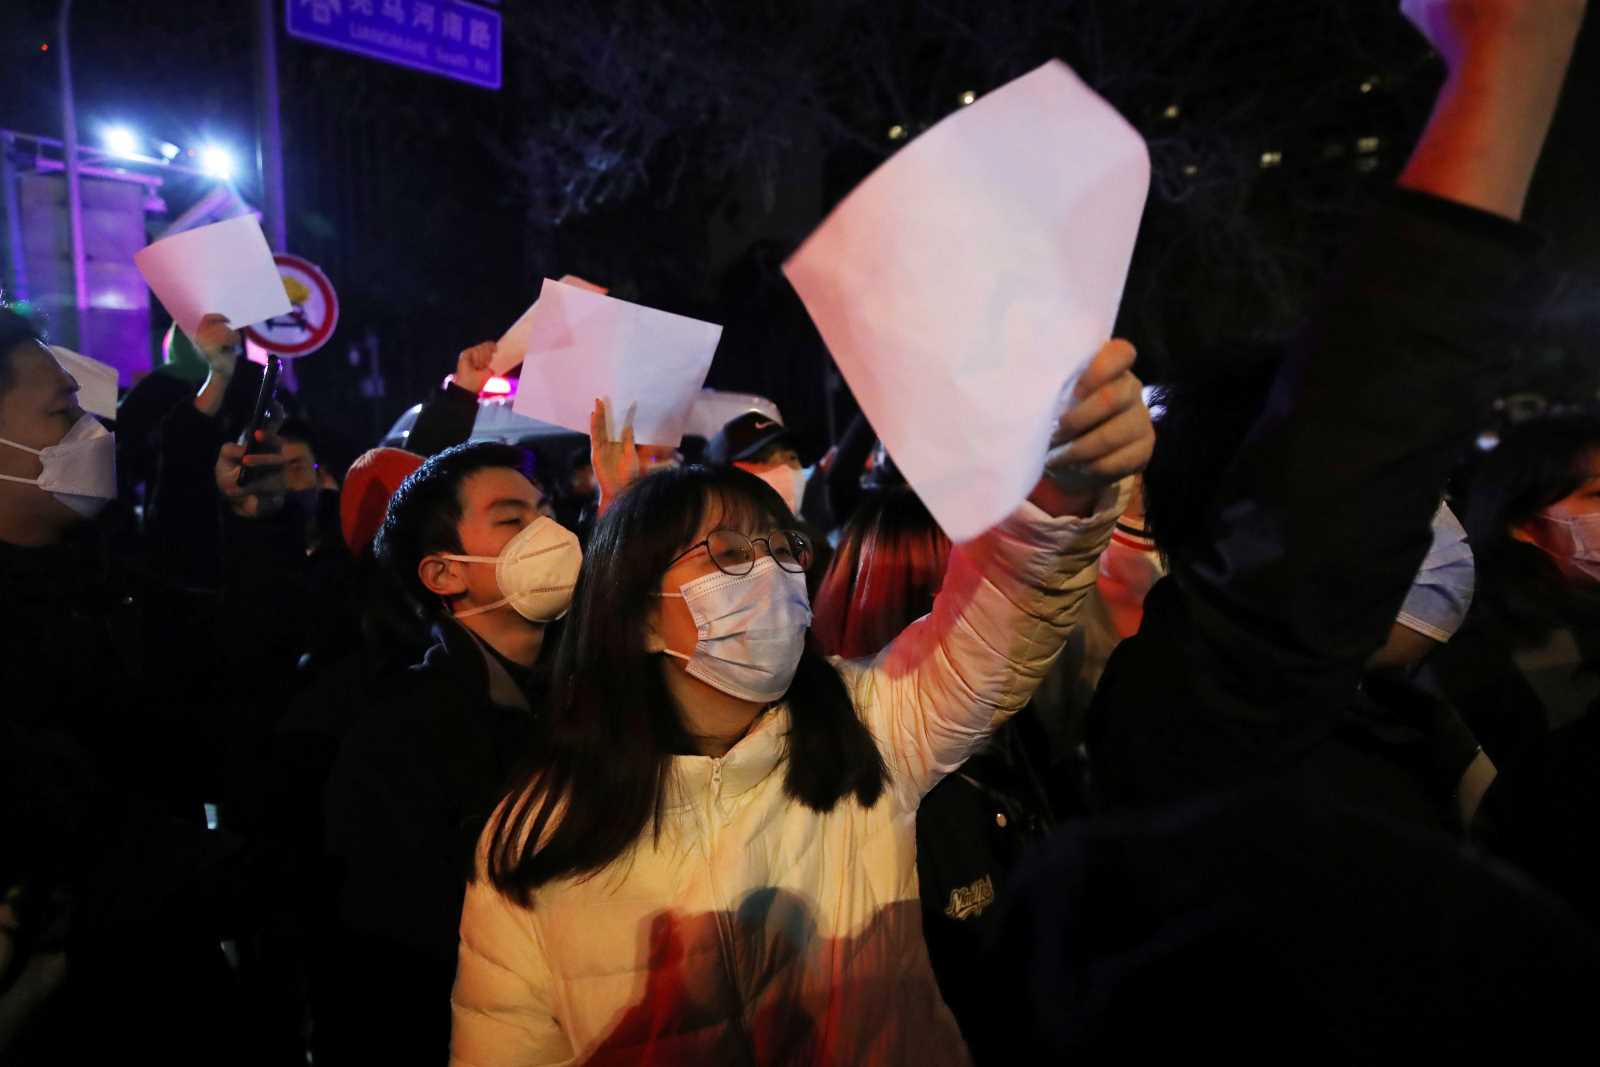 Blank pages stood for no freedom of speech: protesters in Beijing in late November. 